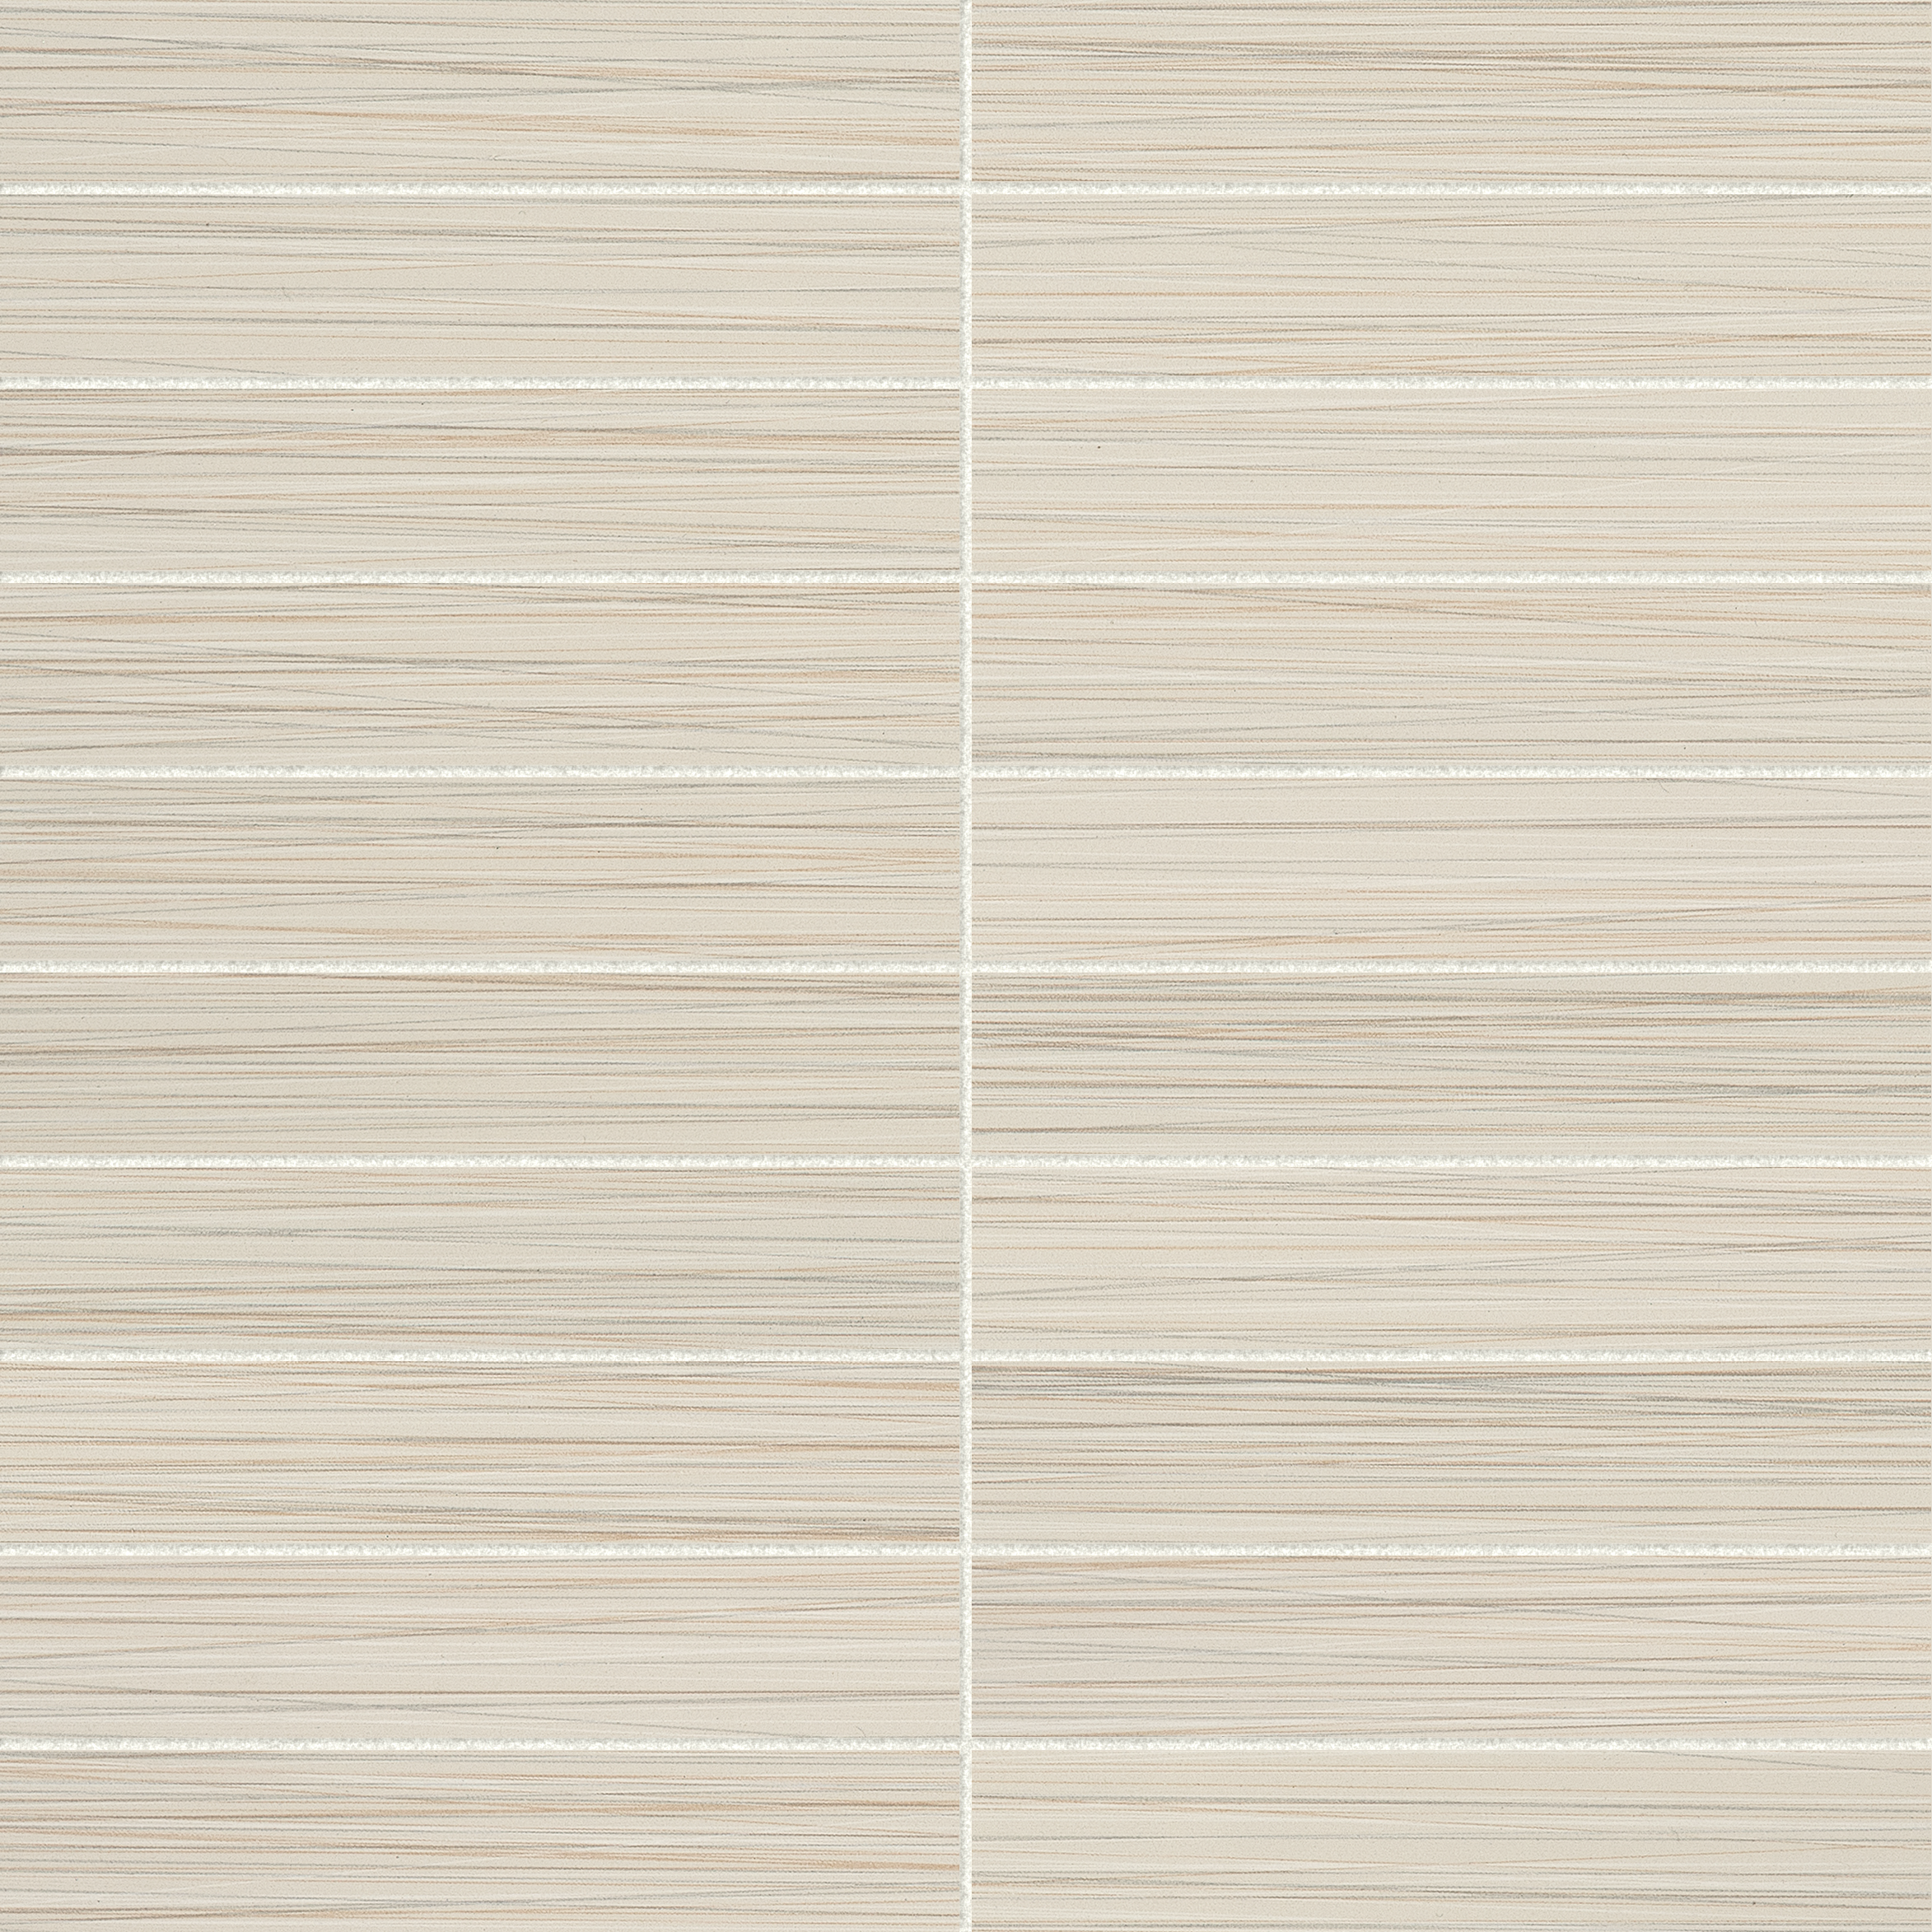 oyster straight stack 1x6-inch pattern color body porcelain mosaic from zera annex anatolia collection distributed by surface group international matte finish straight edge edge mesh shape